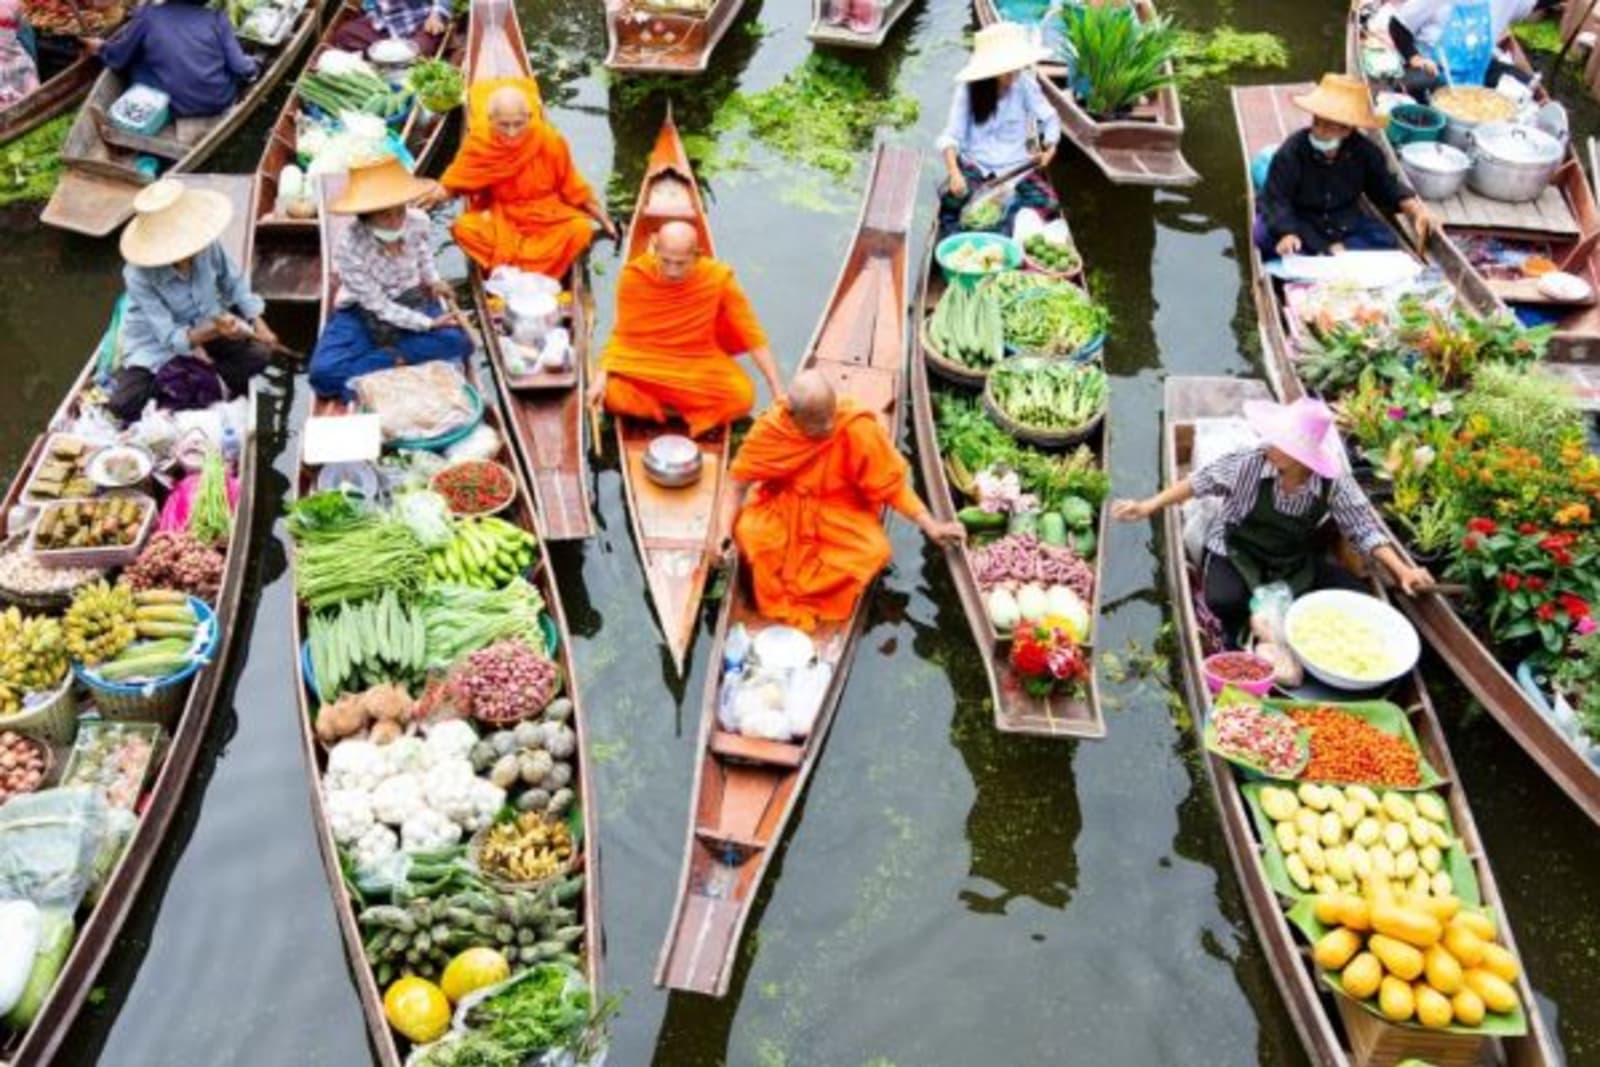 Canoe's carrying variety of fresh foods with monks in orange sit in separate canoe's